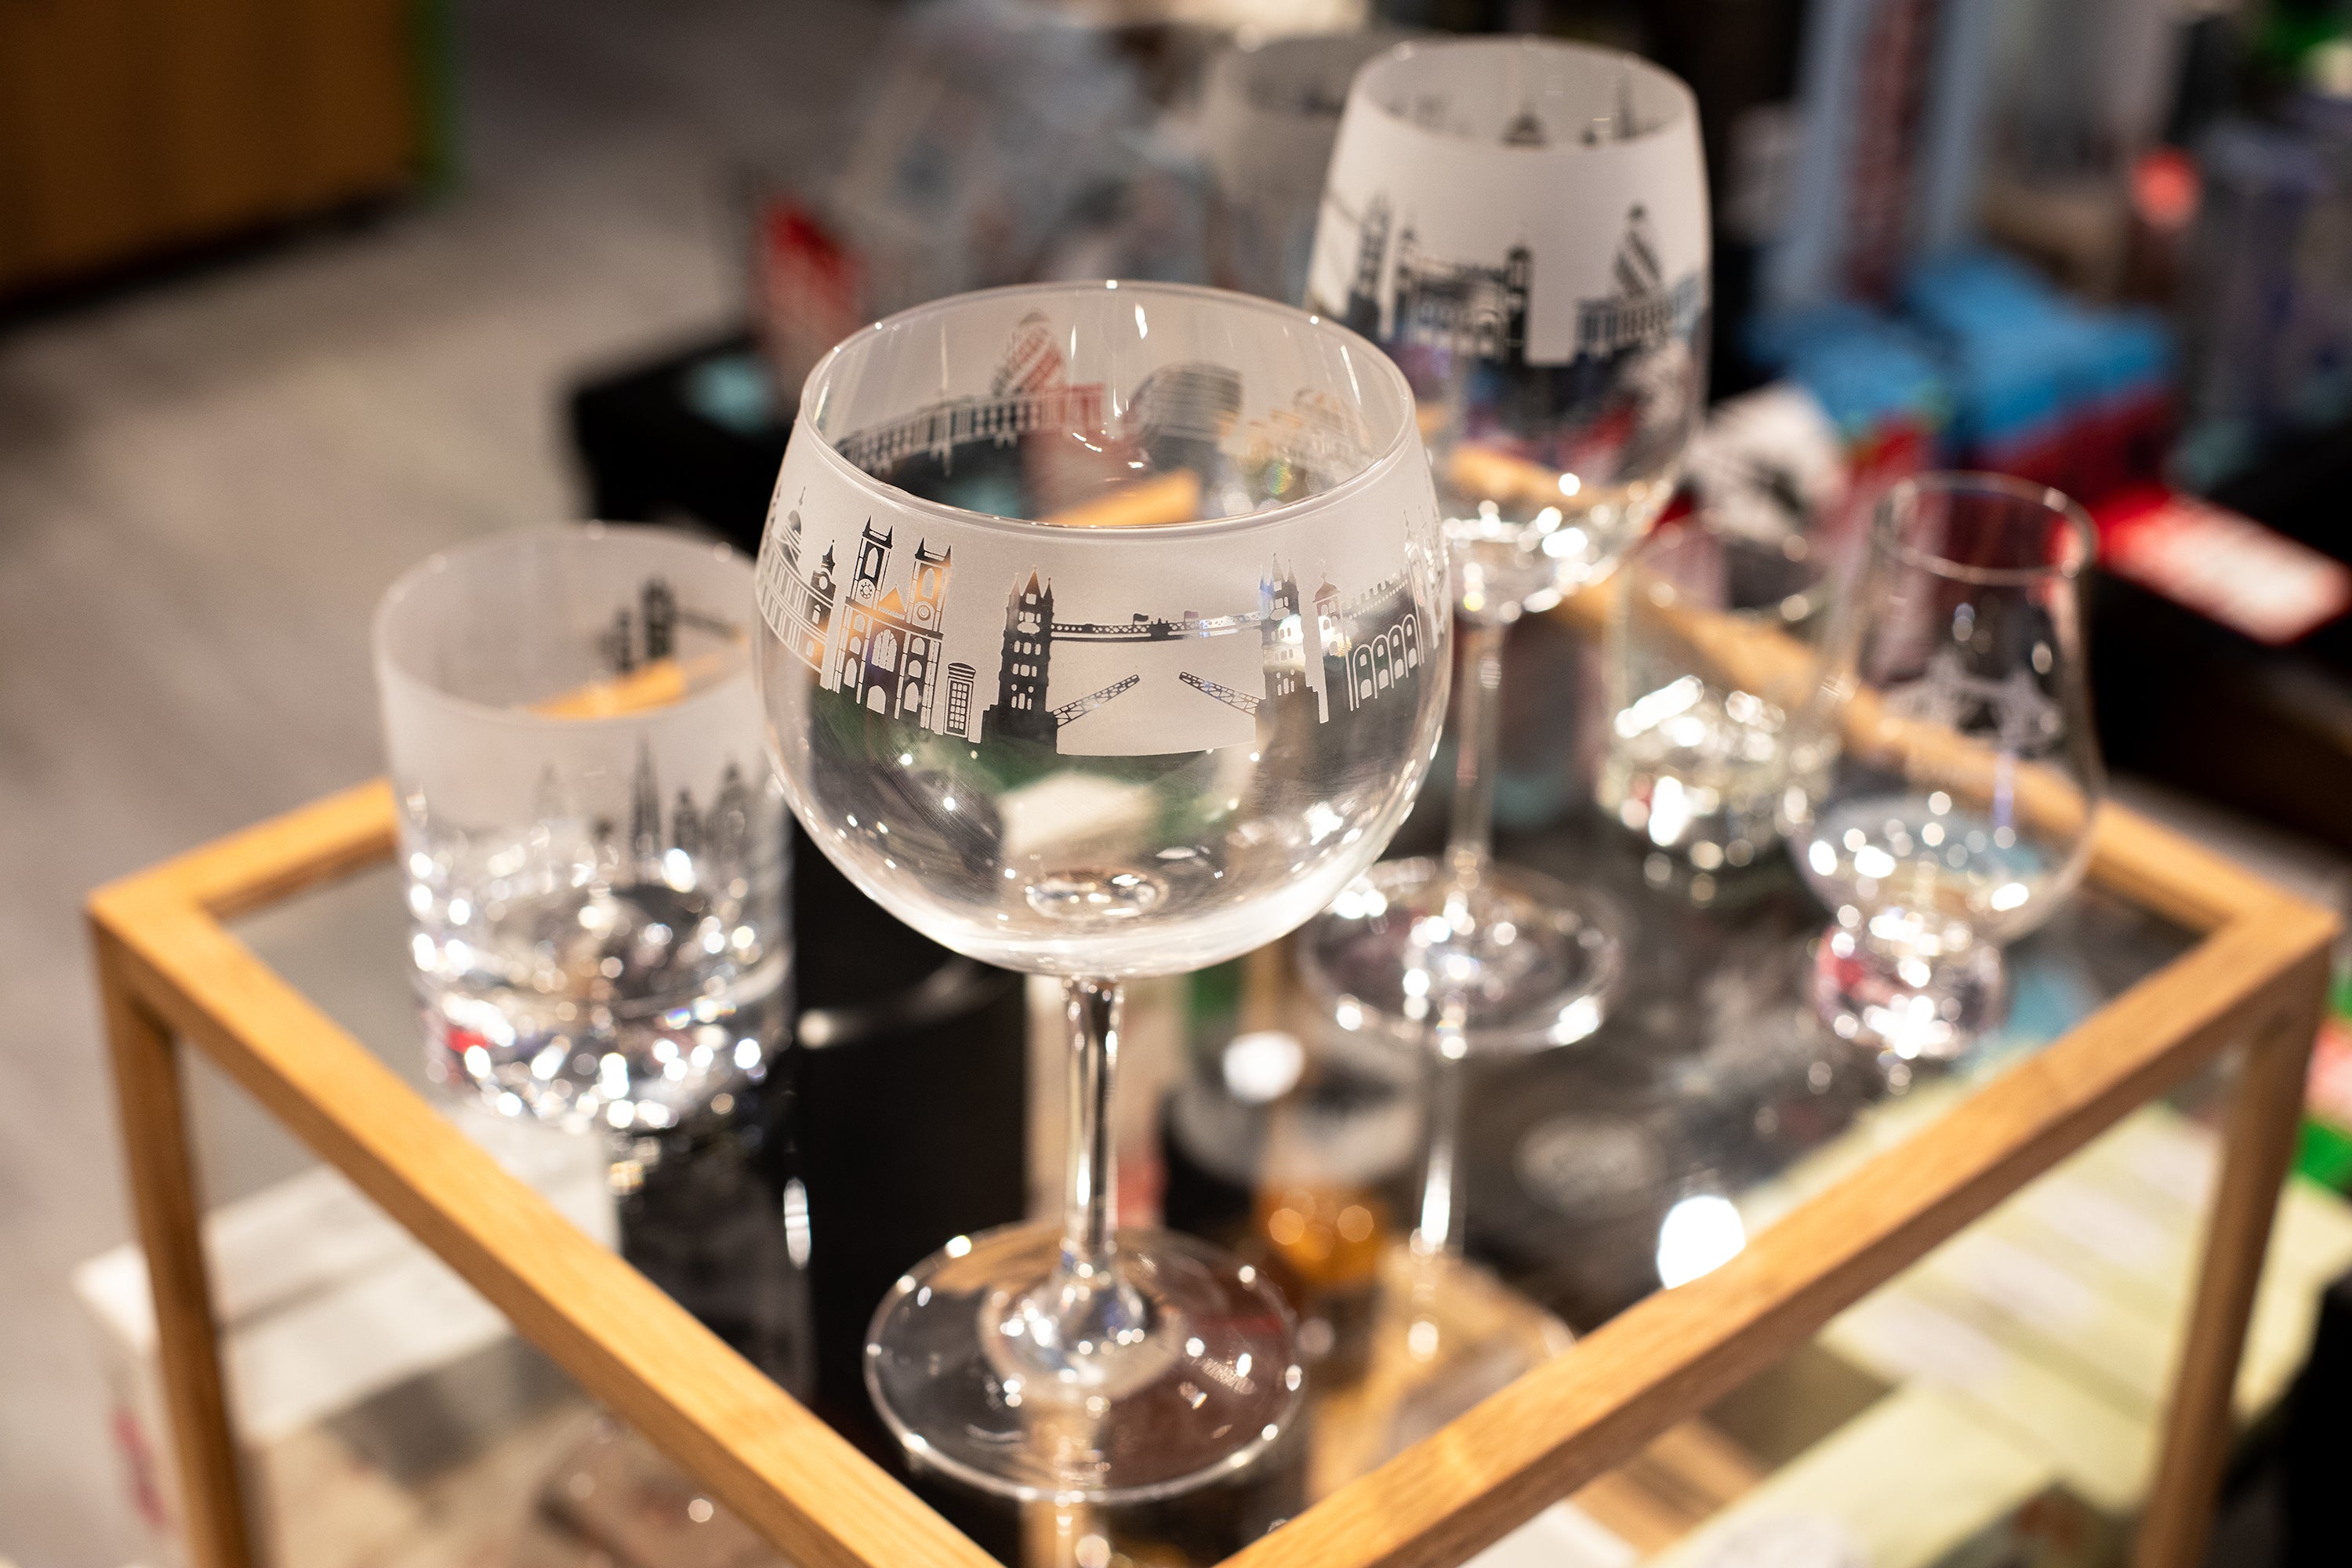 Need a luxurious gift? Glassware at Tower Bridge